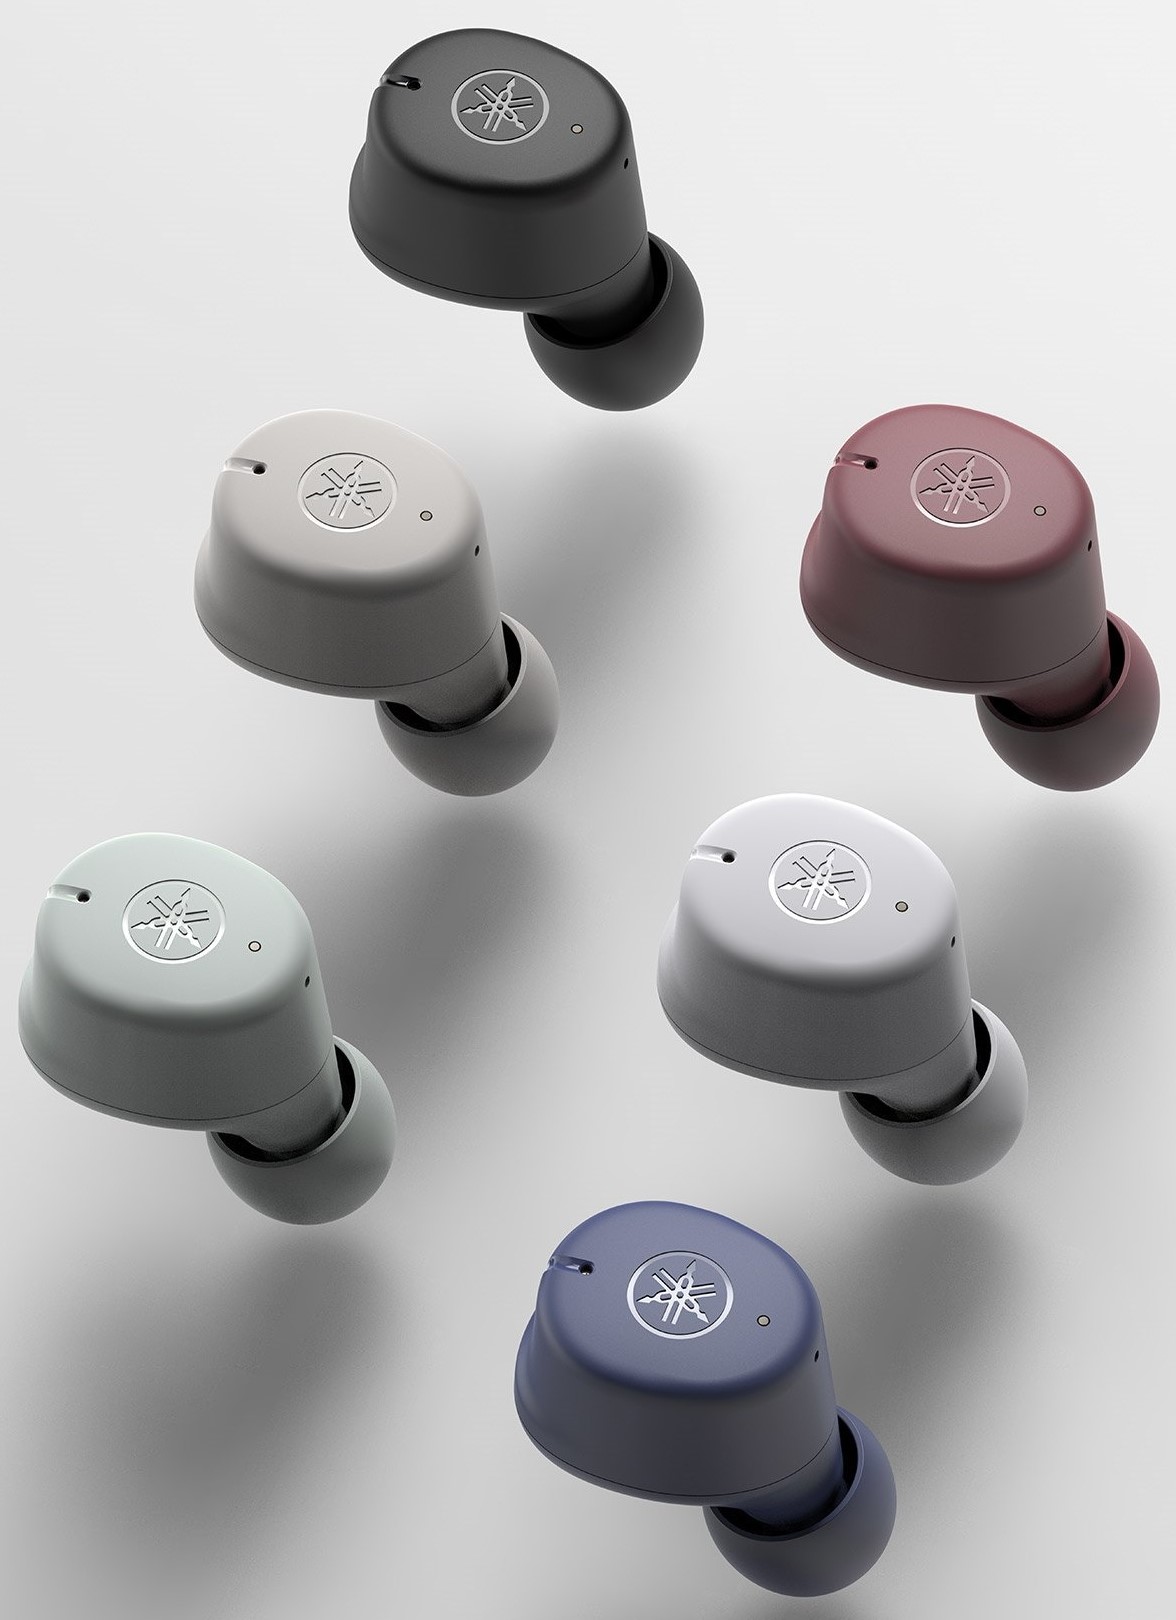 Six different colors of ear buds.